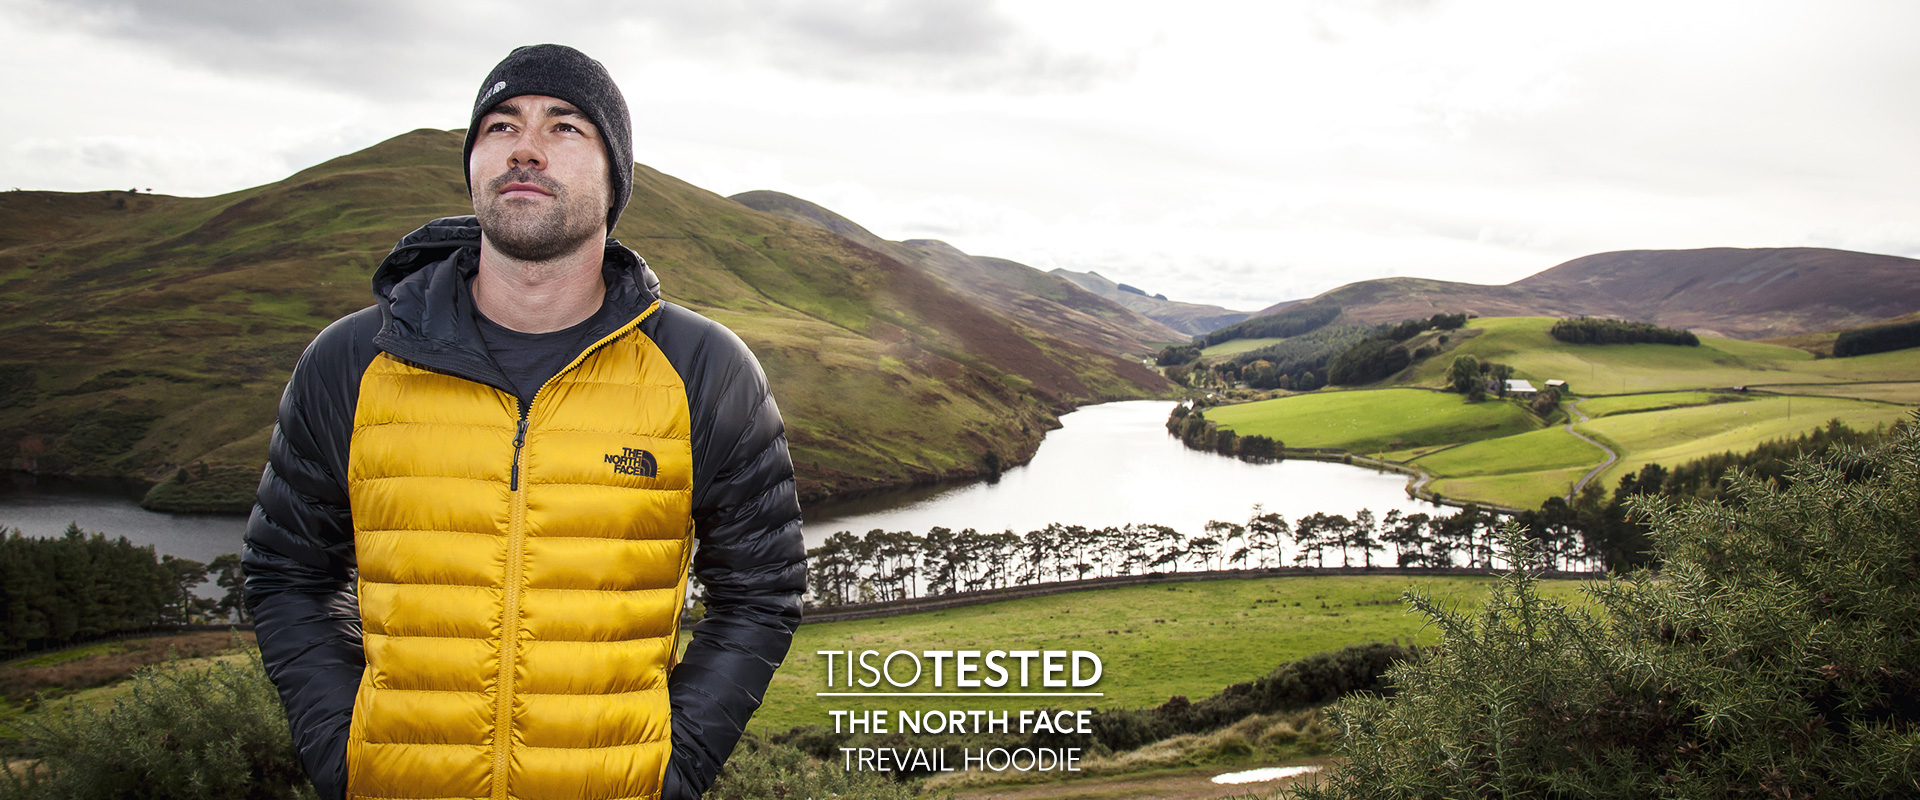 the north face trevail hoodie test